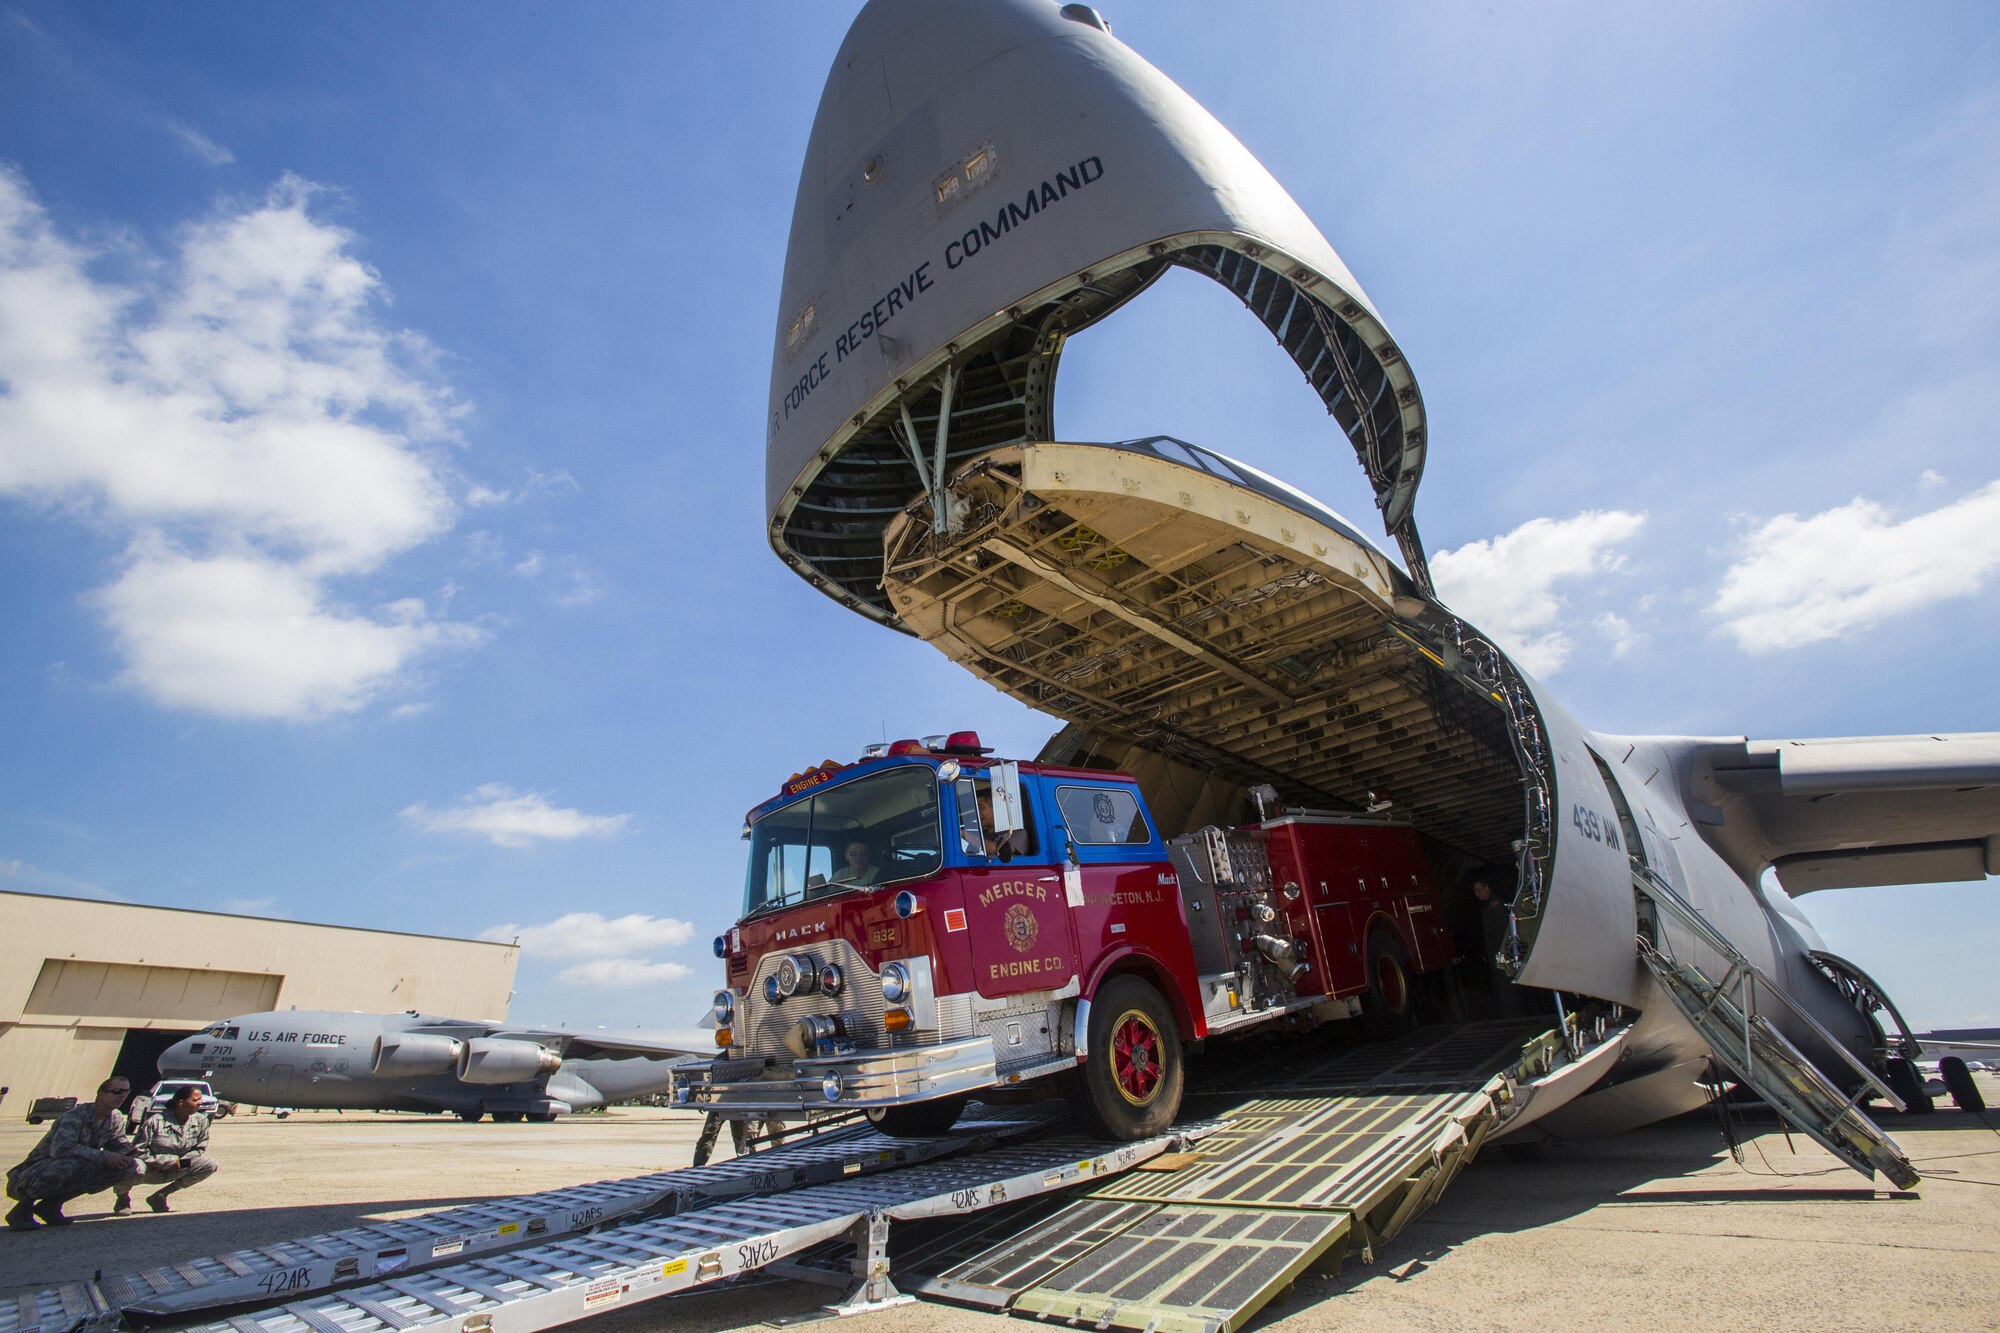 Loadmasters with the 439th Airlift Wing, Air Force Reserve Command, load a 1982 Mack 1250 GPM pumper fire truck onto a C-5B Galaxy at Joint Base McGuire-Dix-Lakehurst N.J., on Aug. 12, 2016. The truck will be flown to Managua, Nicaragua. Master Sgt. Jorge A. Narvaez, a New Jersey Air National Guardsman with the 108th Security Forces Squadron, was instrumental in getting the truck donated to a group of volunteer firefighters in Managua. The 439th AW is located at Westover Air Reserve Base, Mass.